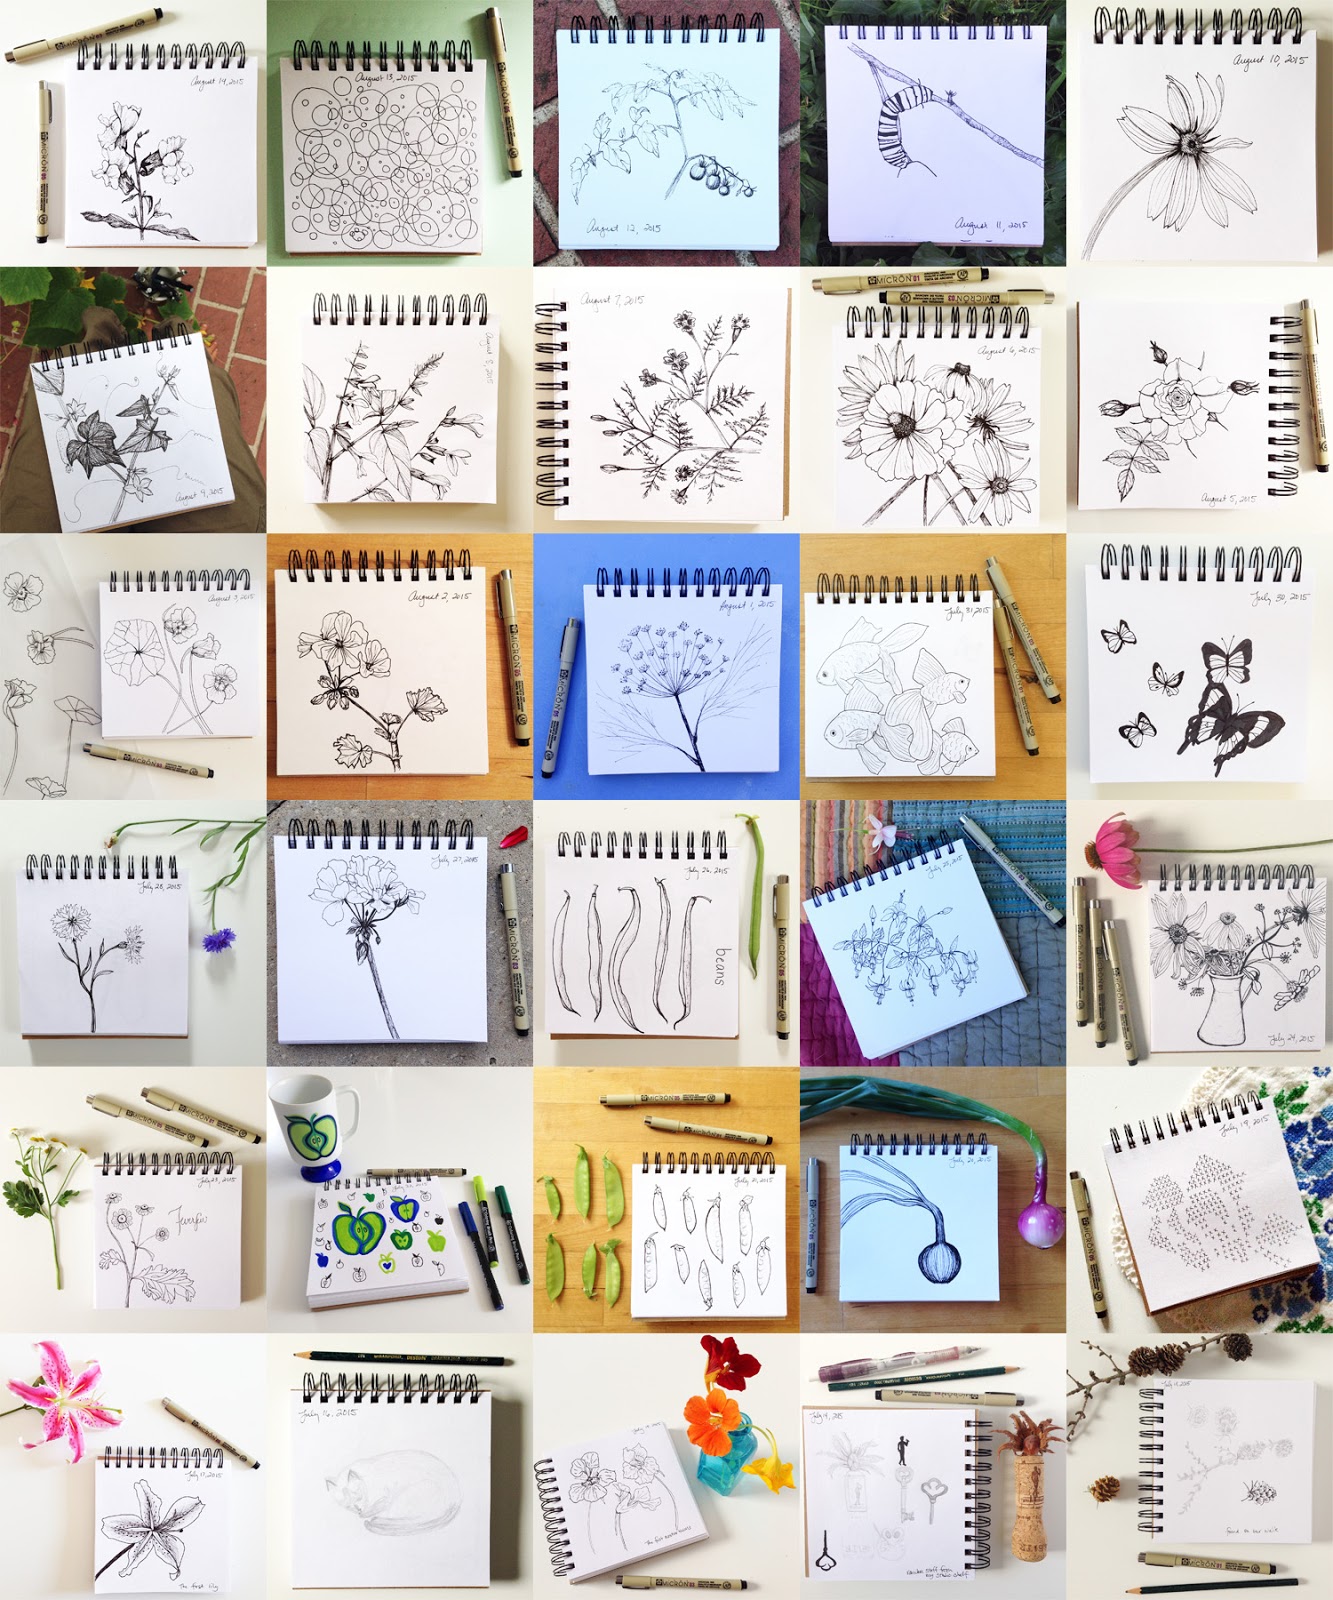 Always Drawing: How to Start and Keep a Daily Sketchbook, Mike Lowery